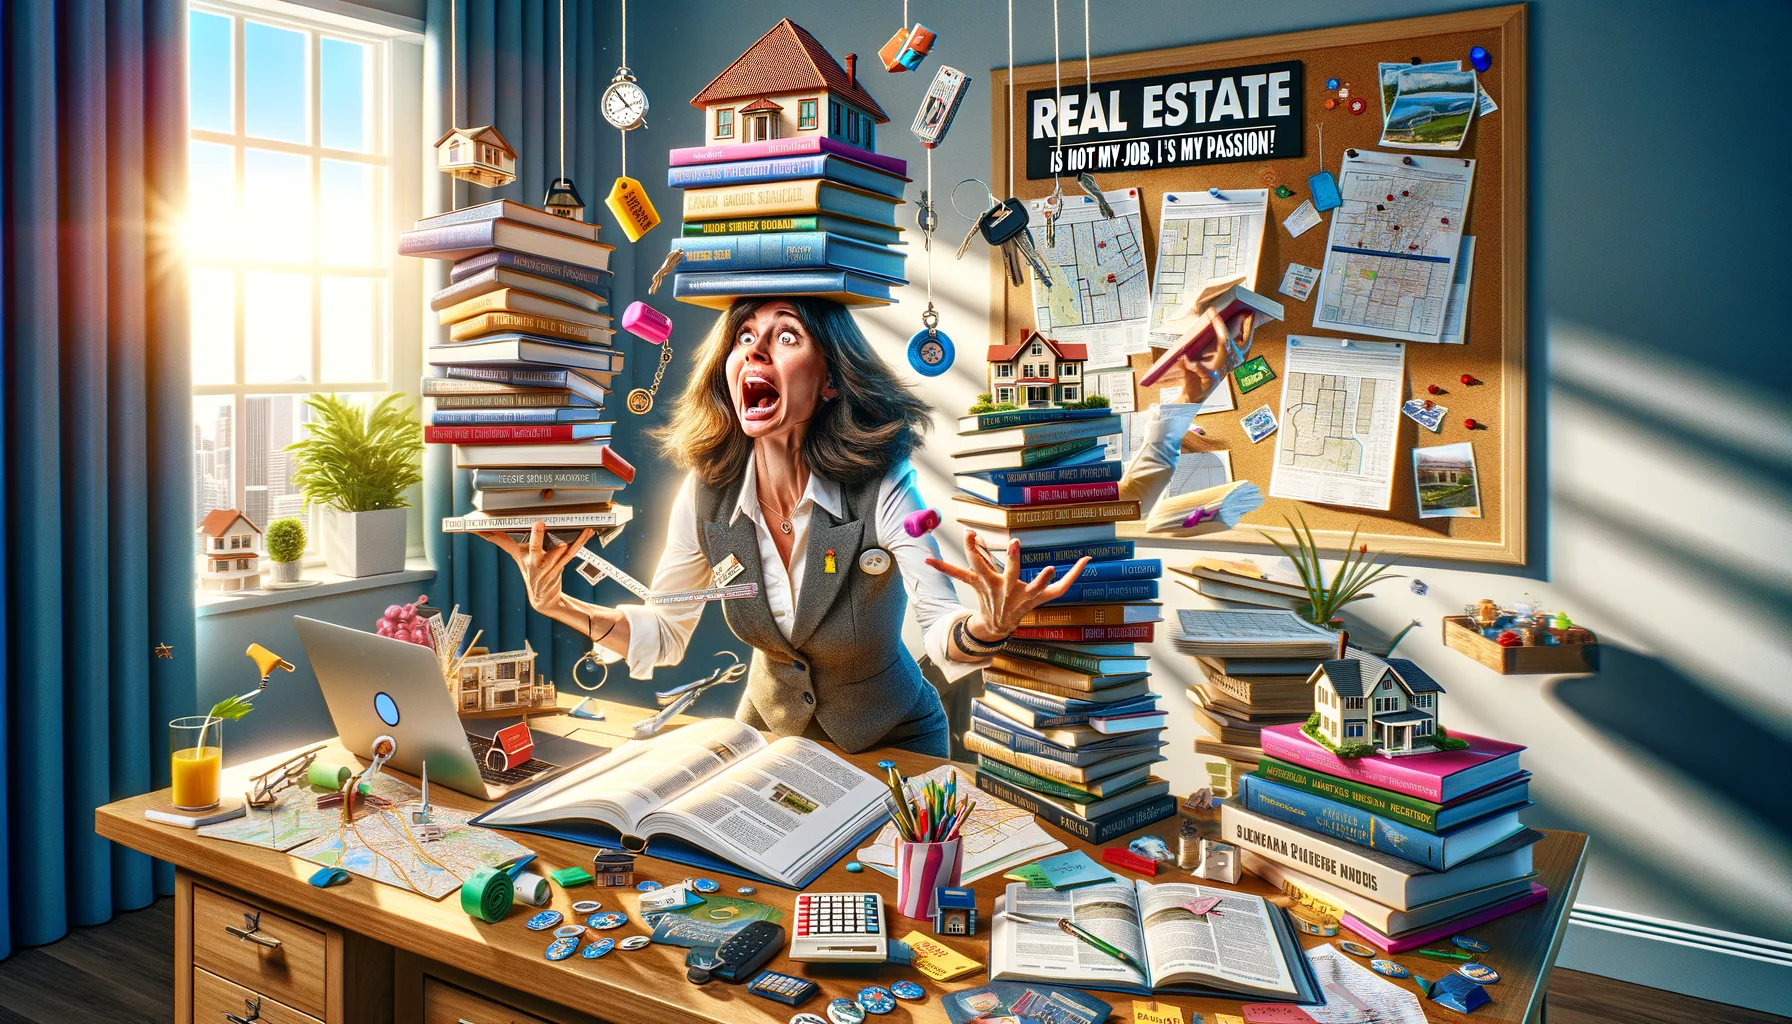 Generate an image of a comical situation revolving around real estate books and resources. Picture a bustling, sun-filled home office setting. An energetic Caucasian woman, a dedicated real estate agent, is engrossed in juggling multiple real estate books, maps, and house models simultaneously. She is attempting to balance a scale model of a house on her head, while her hands are full with a colorful real estate book and a collection of keys. House-related pins and stickers fill the cork board behind her. A cleverly positioned sign reads, 'Real Estate is not just my job, it’s my passion!' in bold lettering in the background, adding a humorous twist.